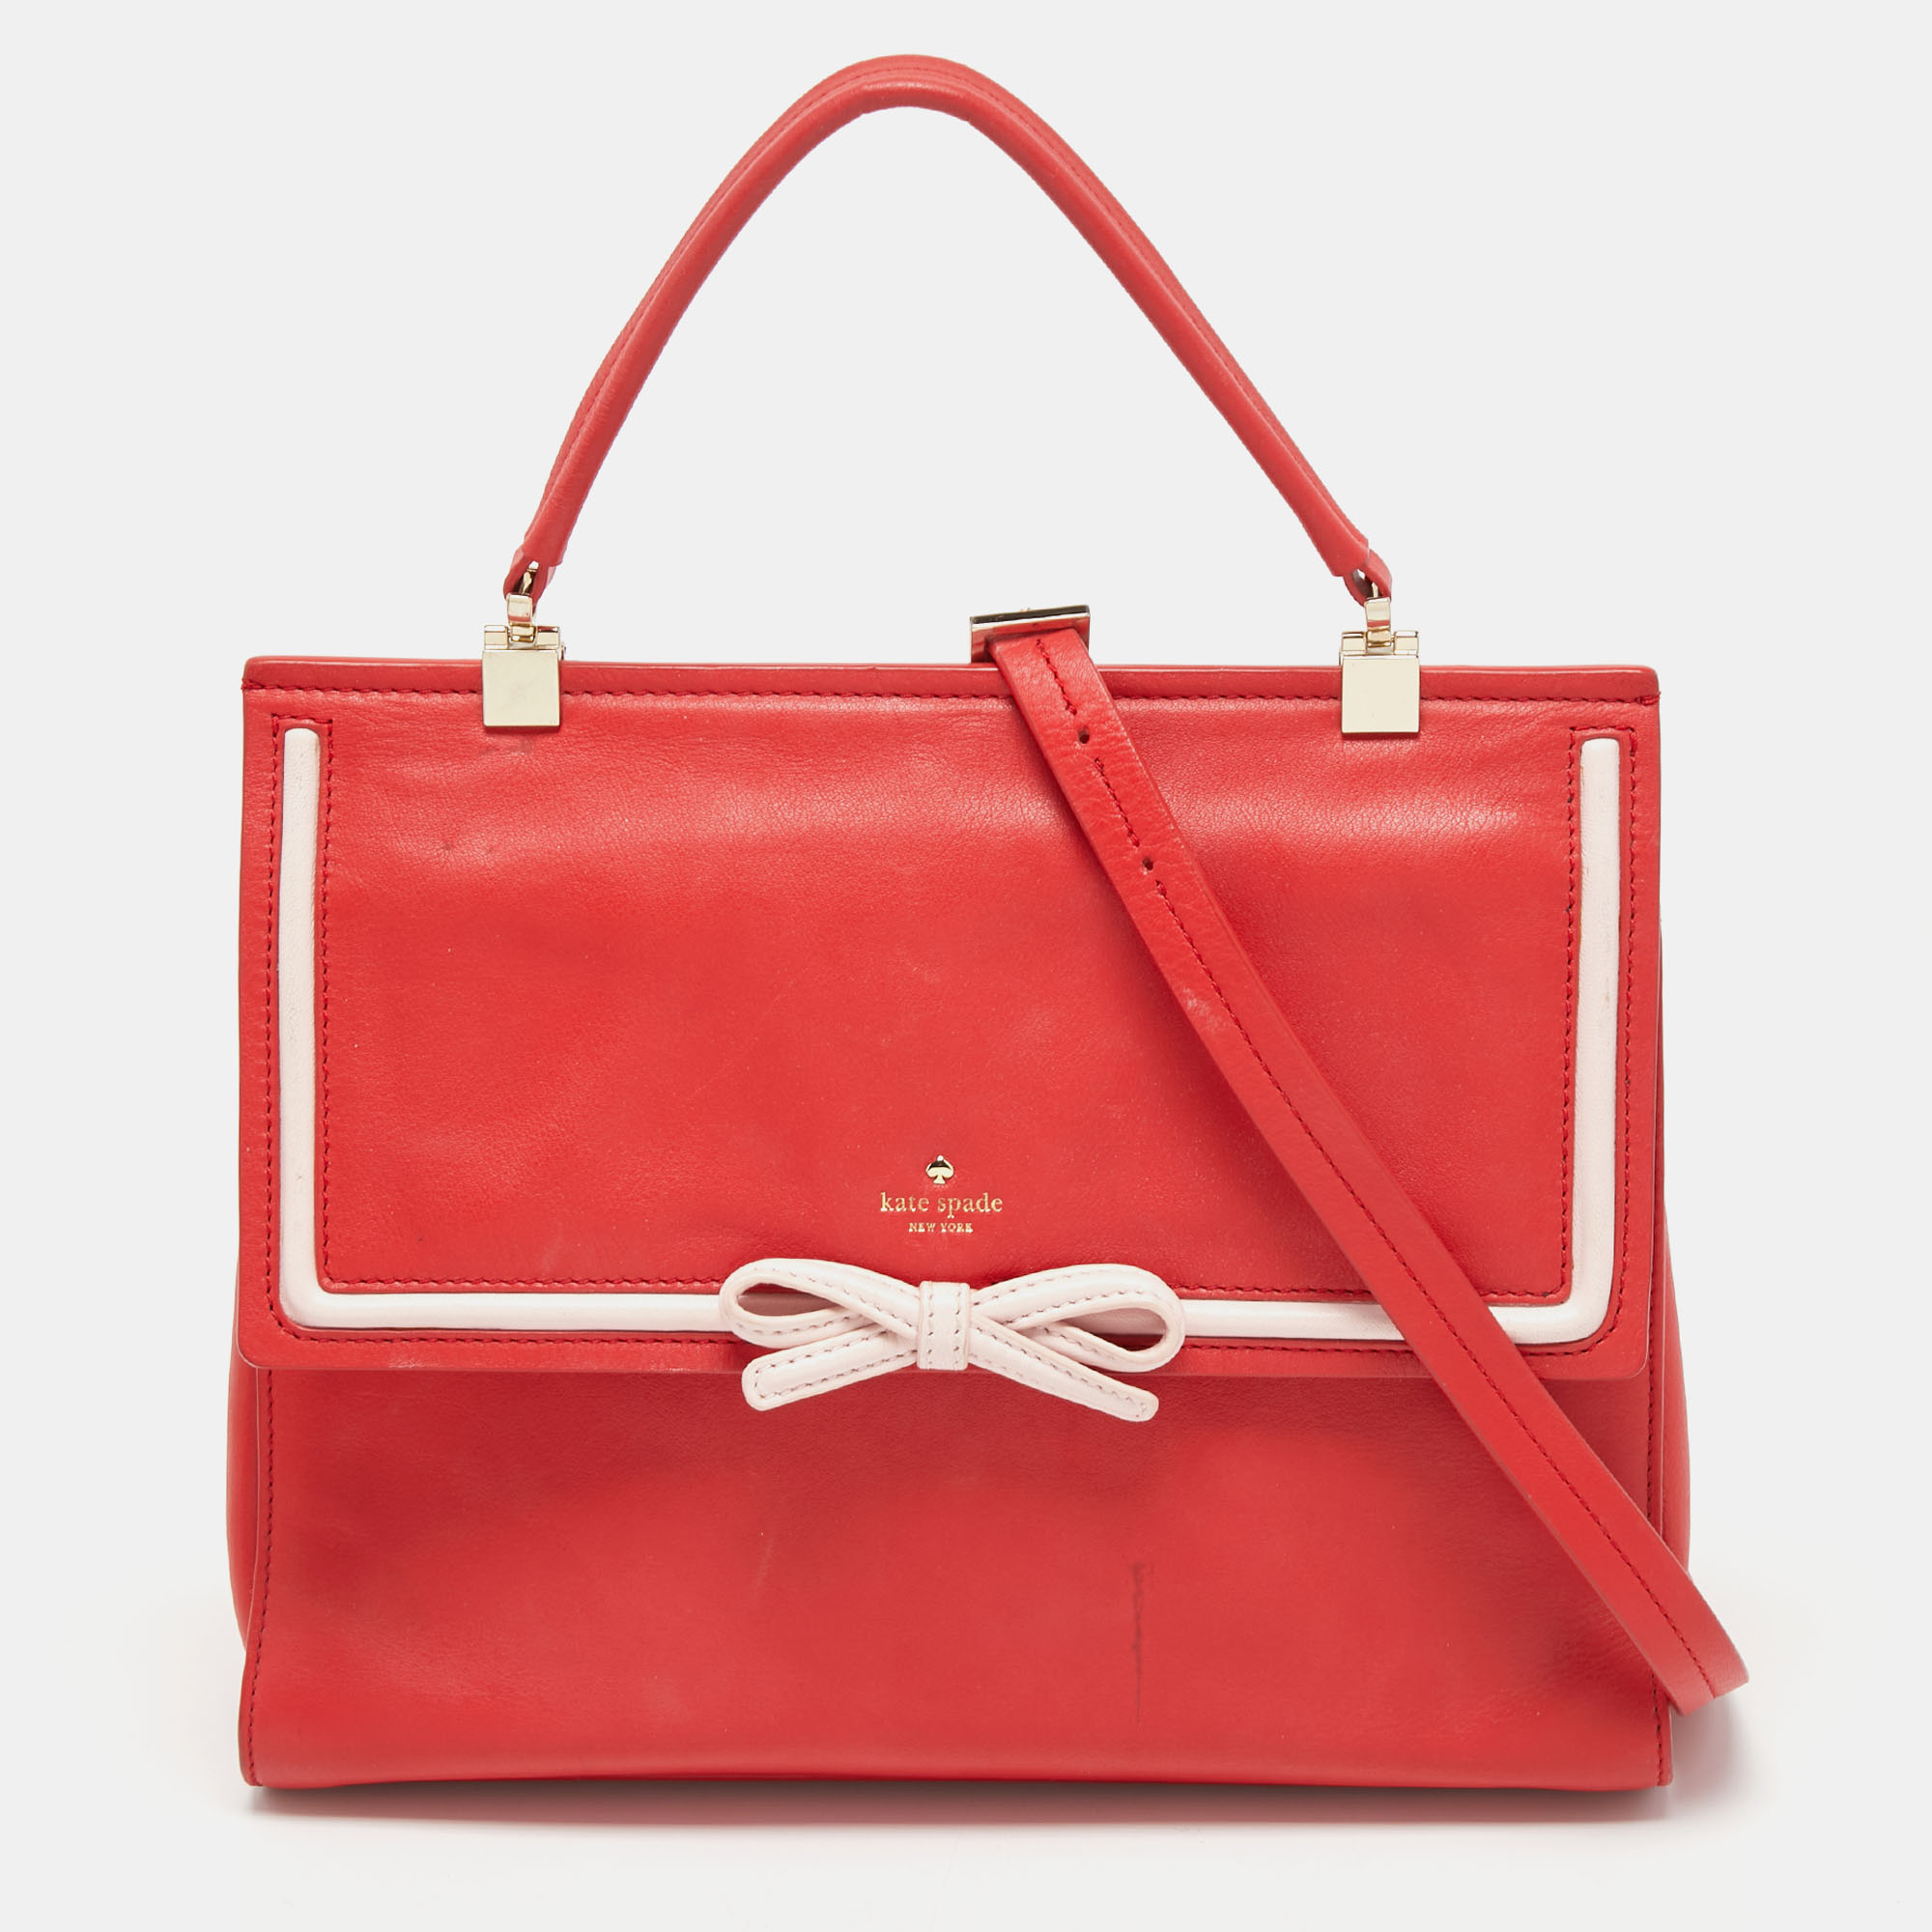 Kate Spade Red Leather Flap Top Handle Bag